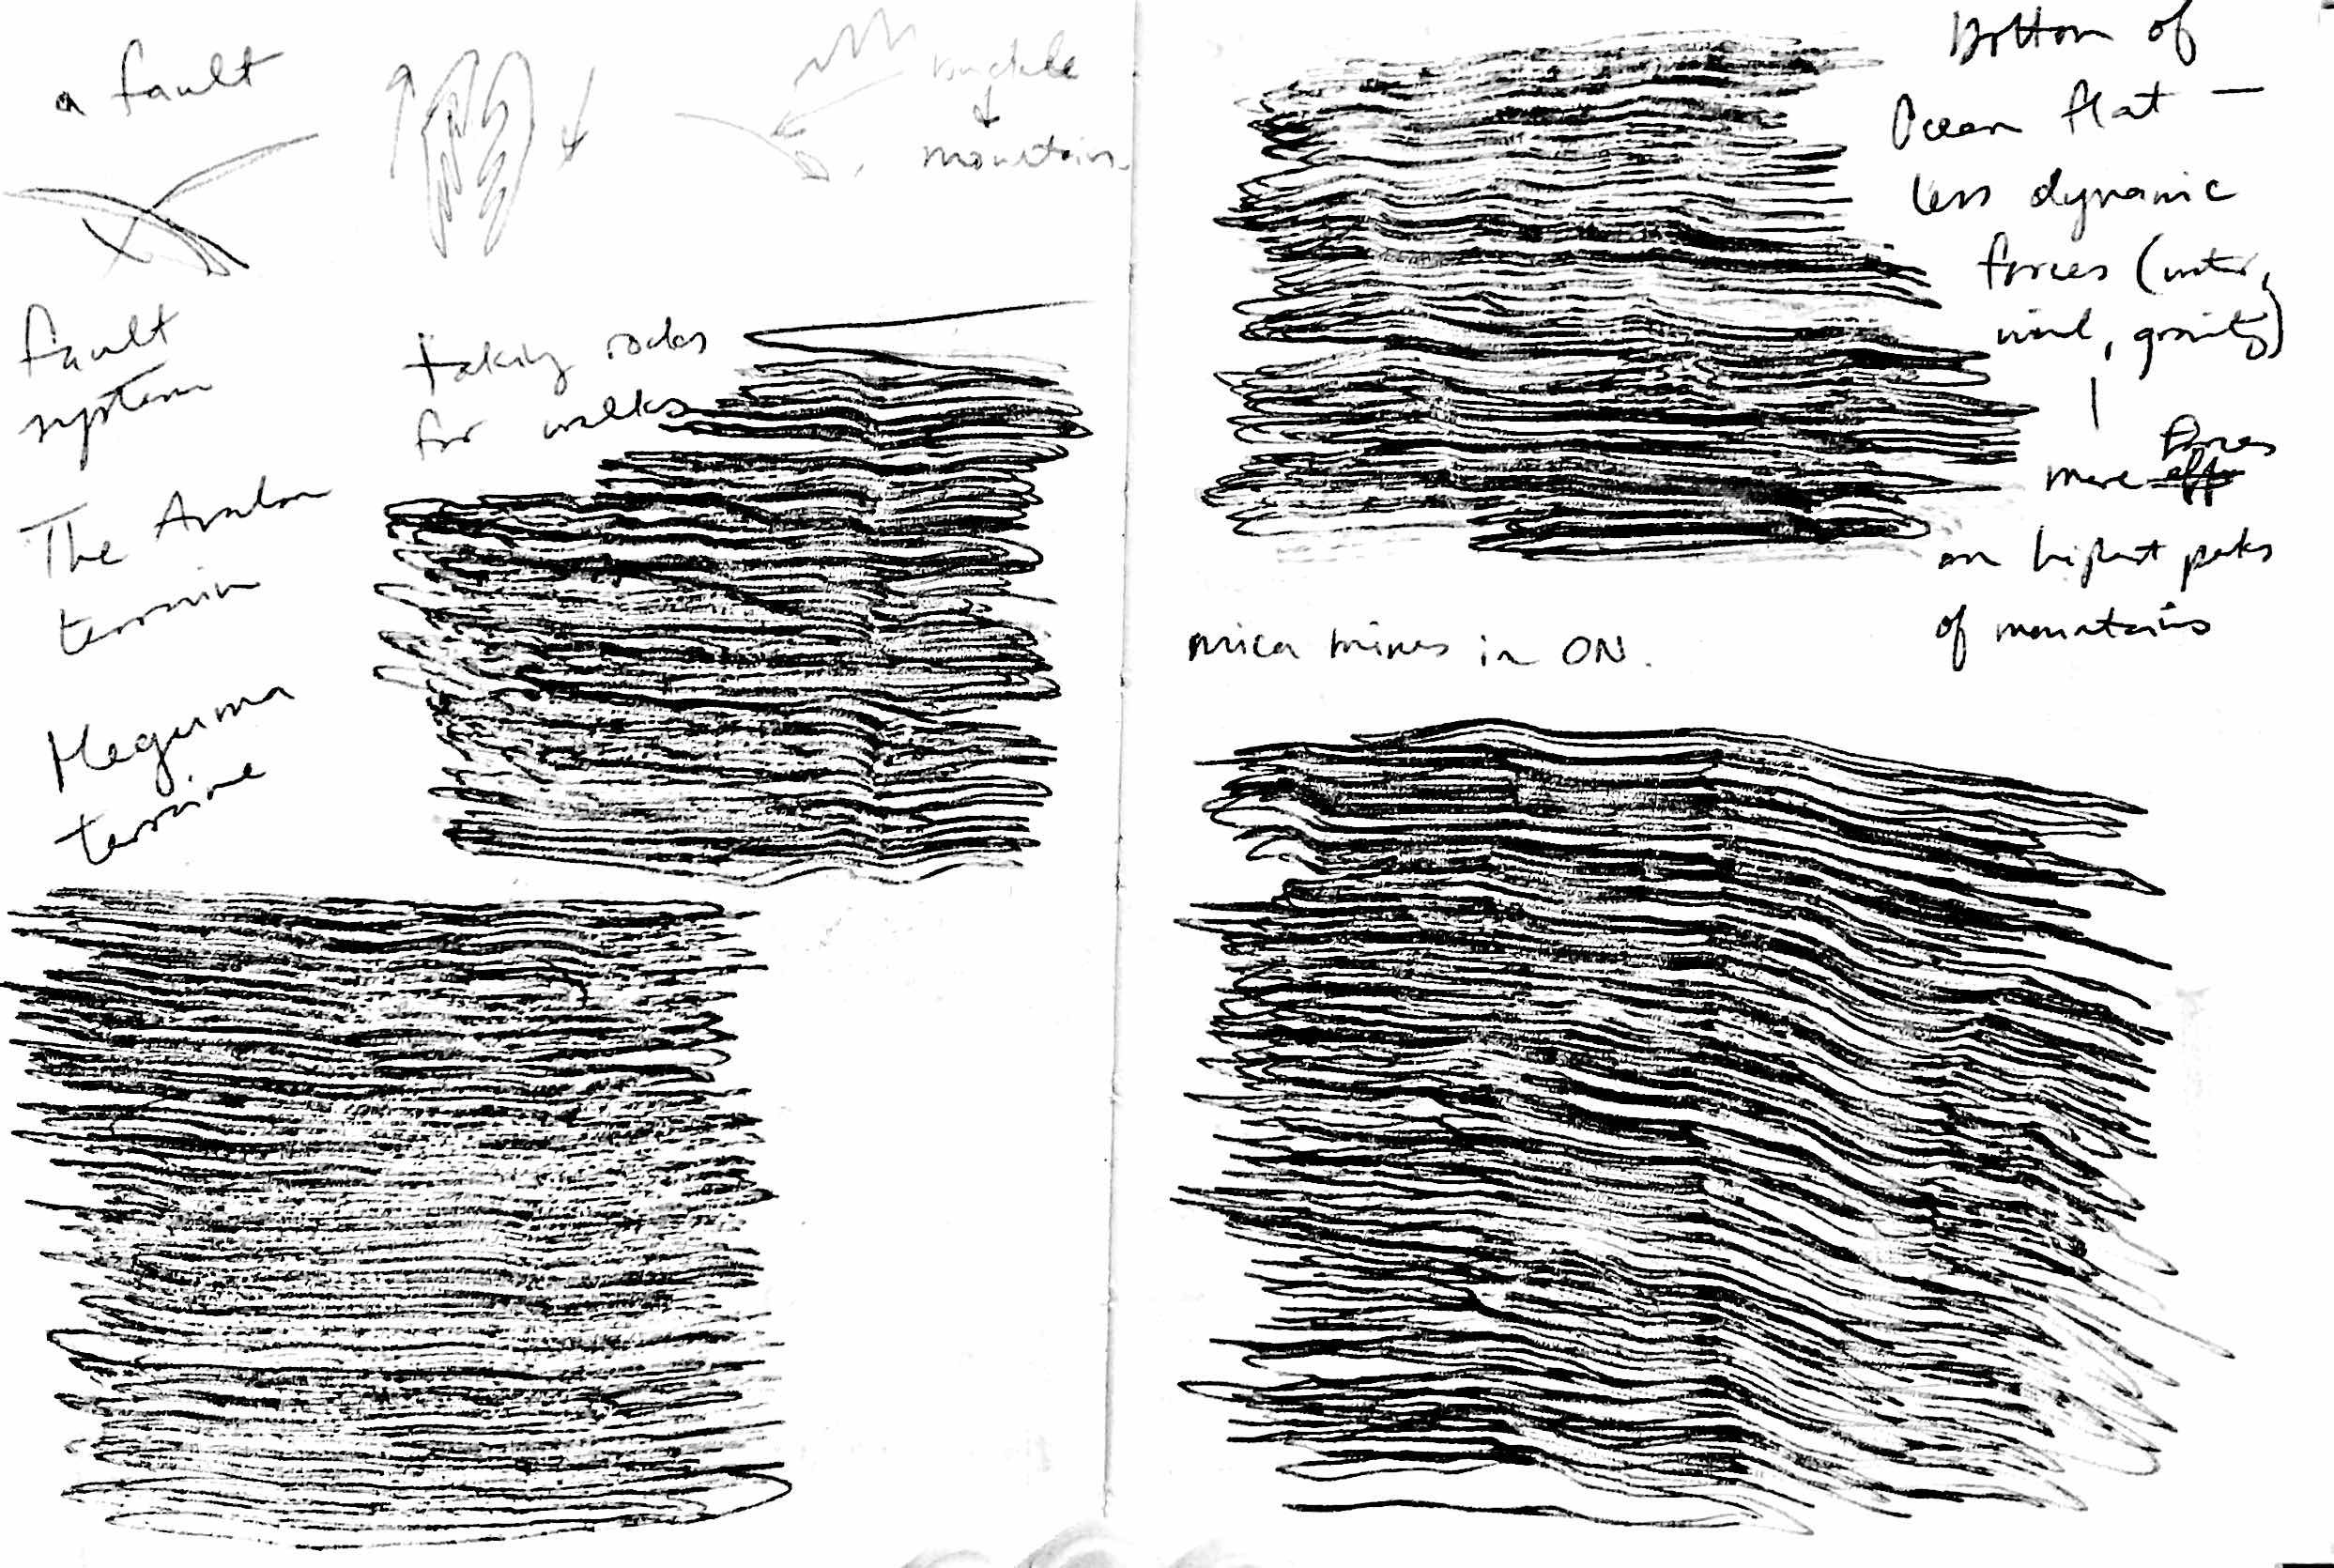 spread of notes with rubbings of various rock surfaces